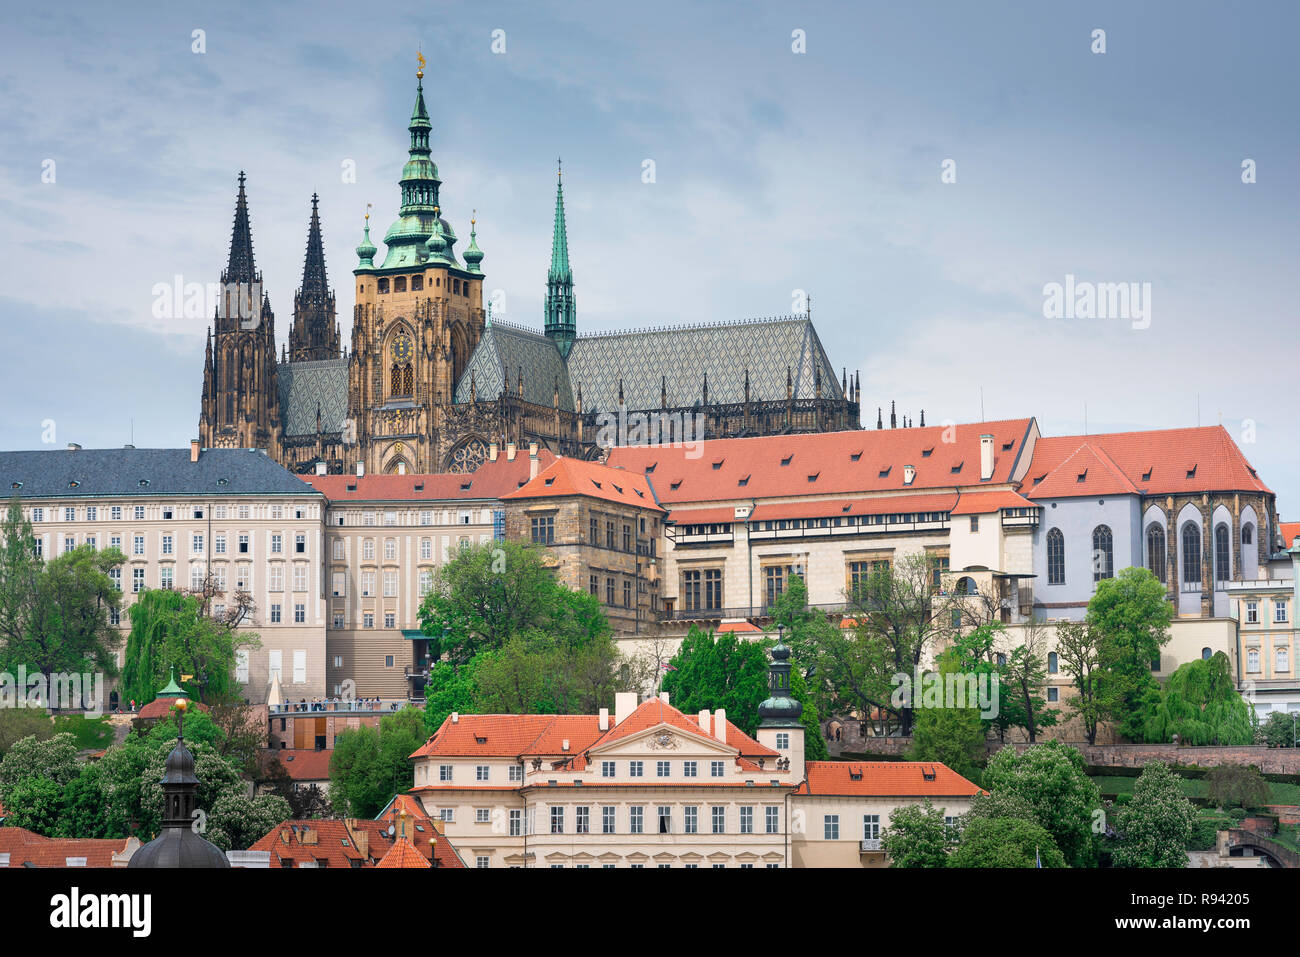 Prague castle cathedral, view of the Hradcany district with the Prague Castle buildings and the roof and spires of St Vitus Cathedral on the skyline. Stock Photo